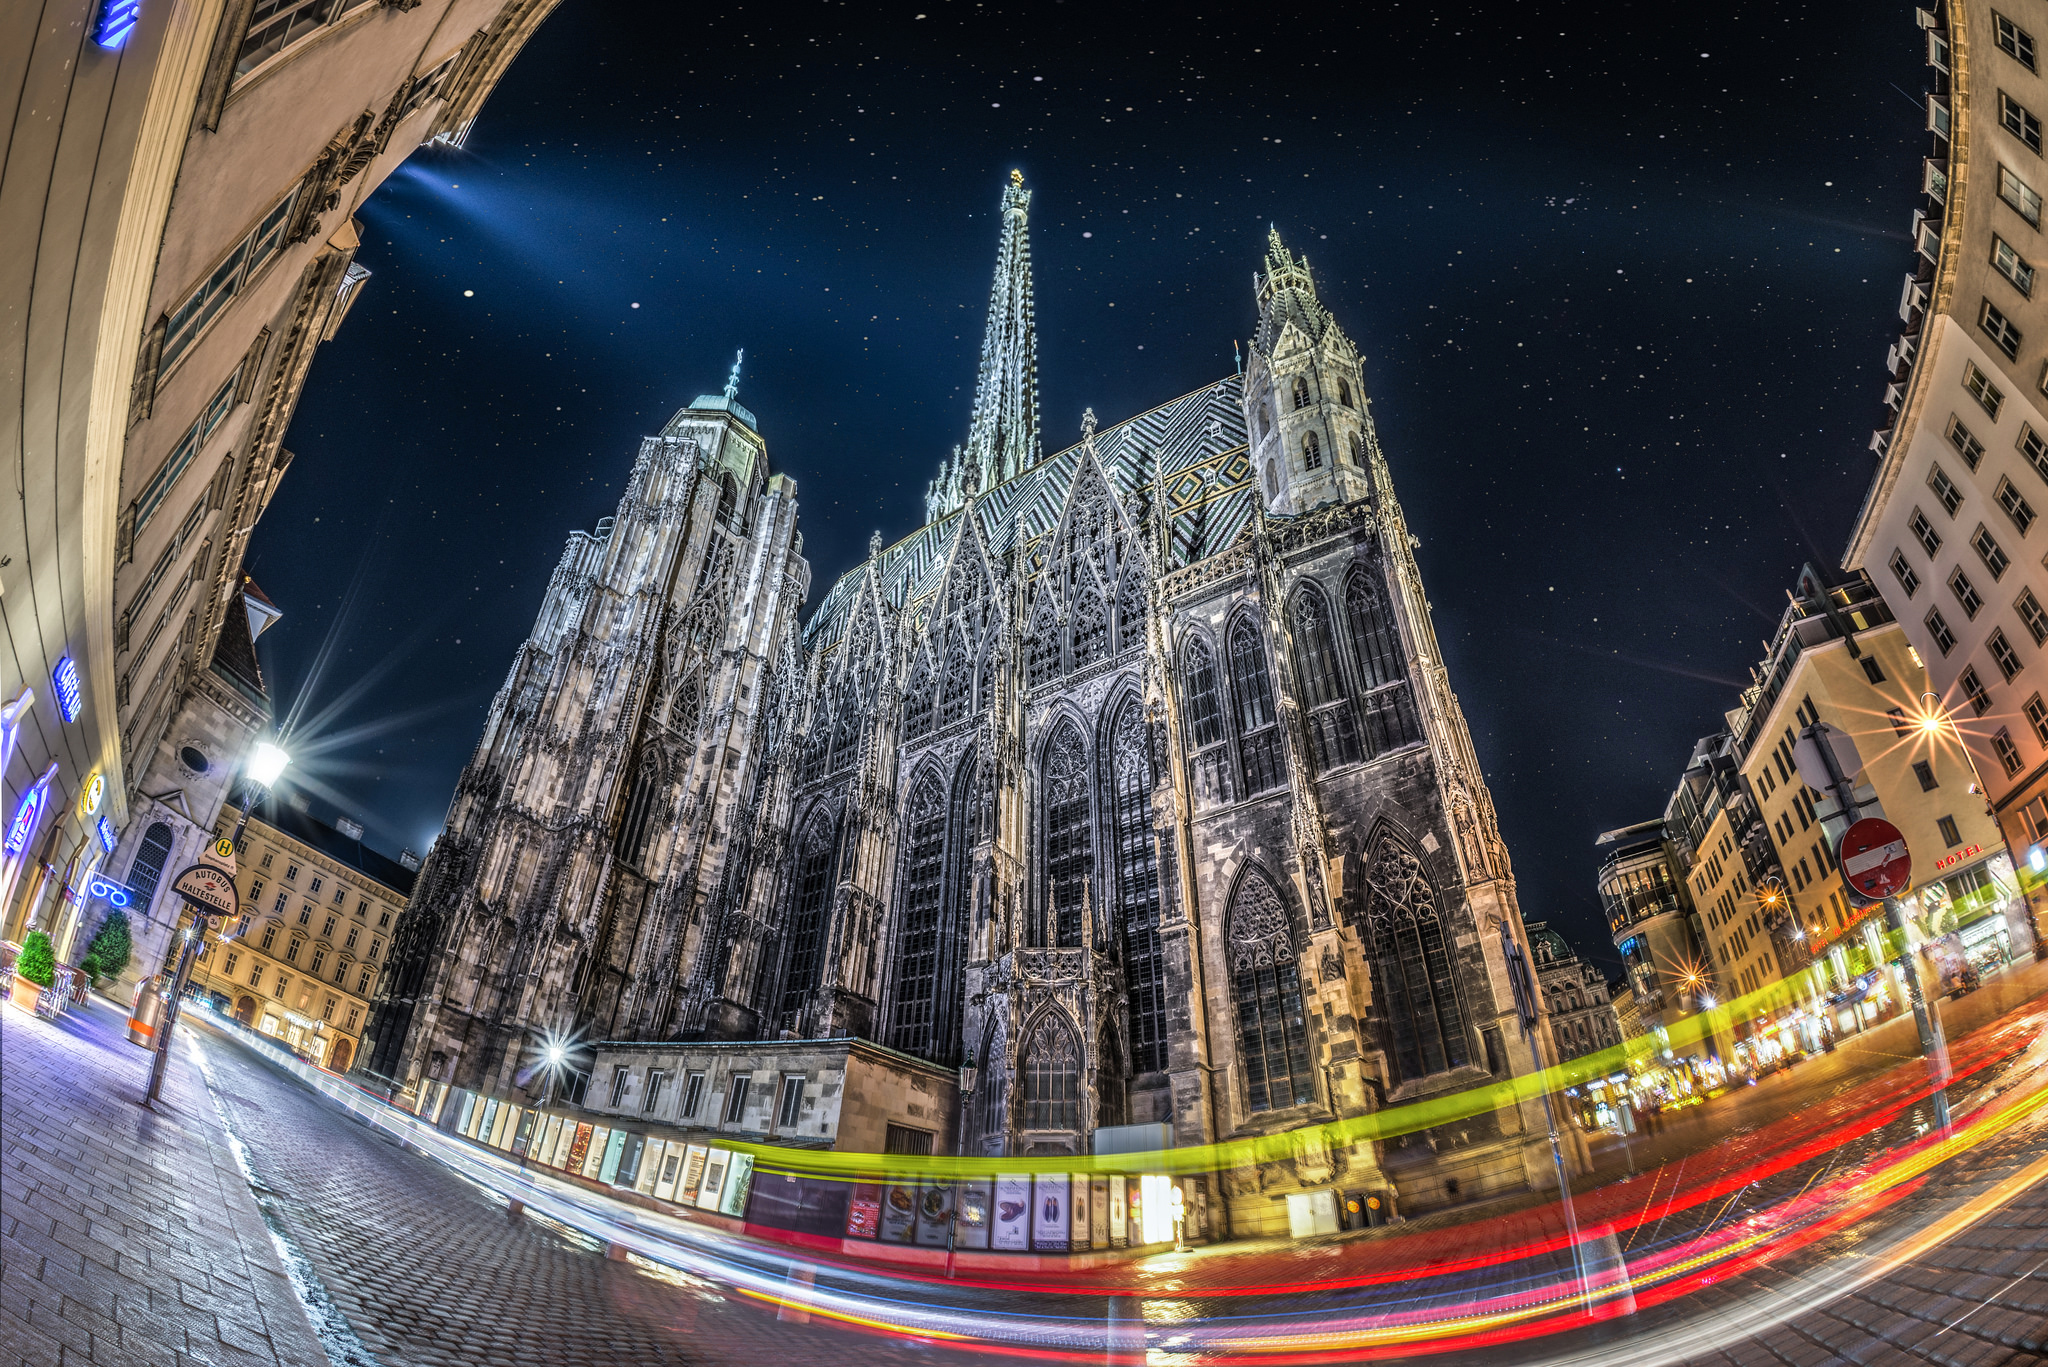 General 2048x1367 Vienna cityscape long exposure cathedral Stephasdom Austria